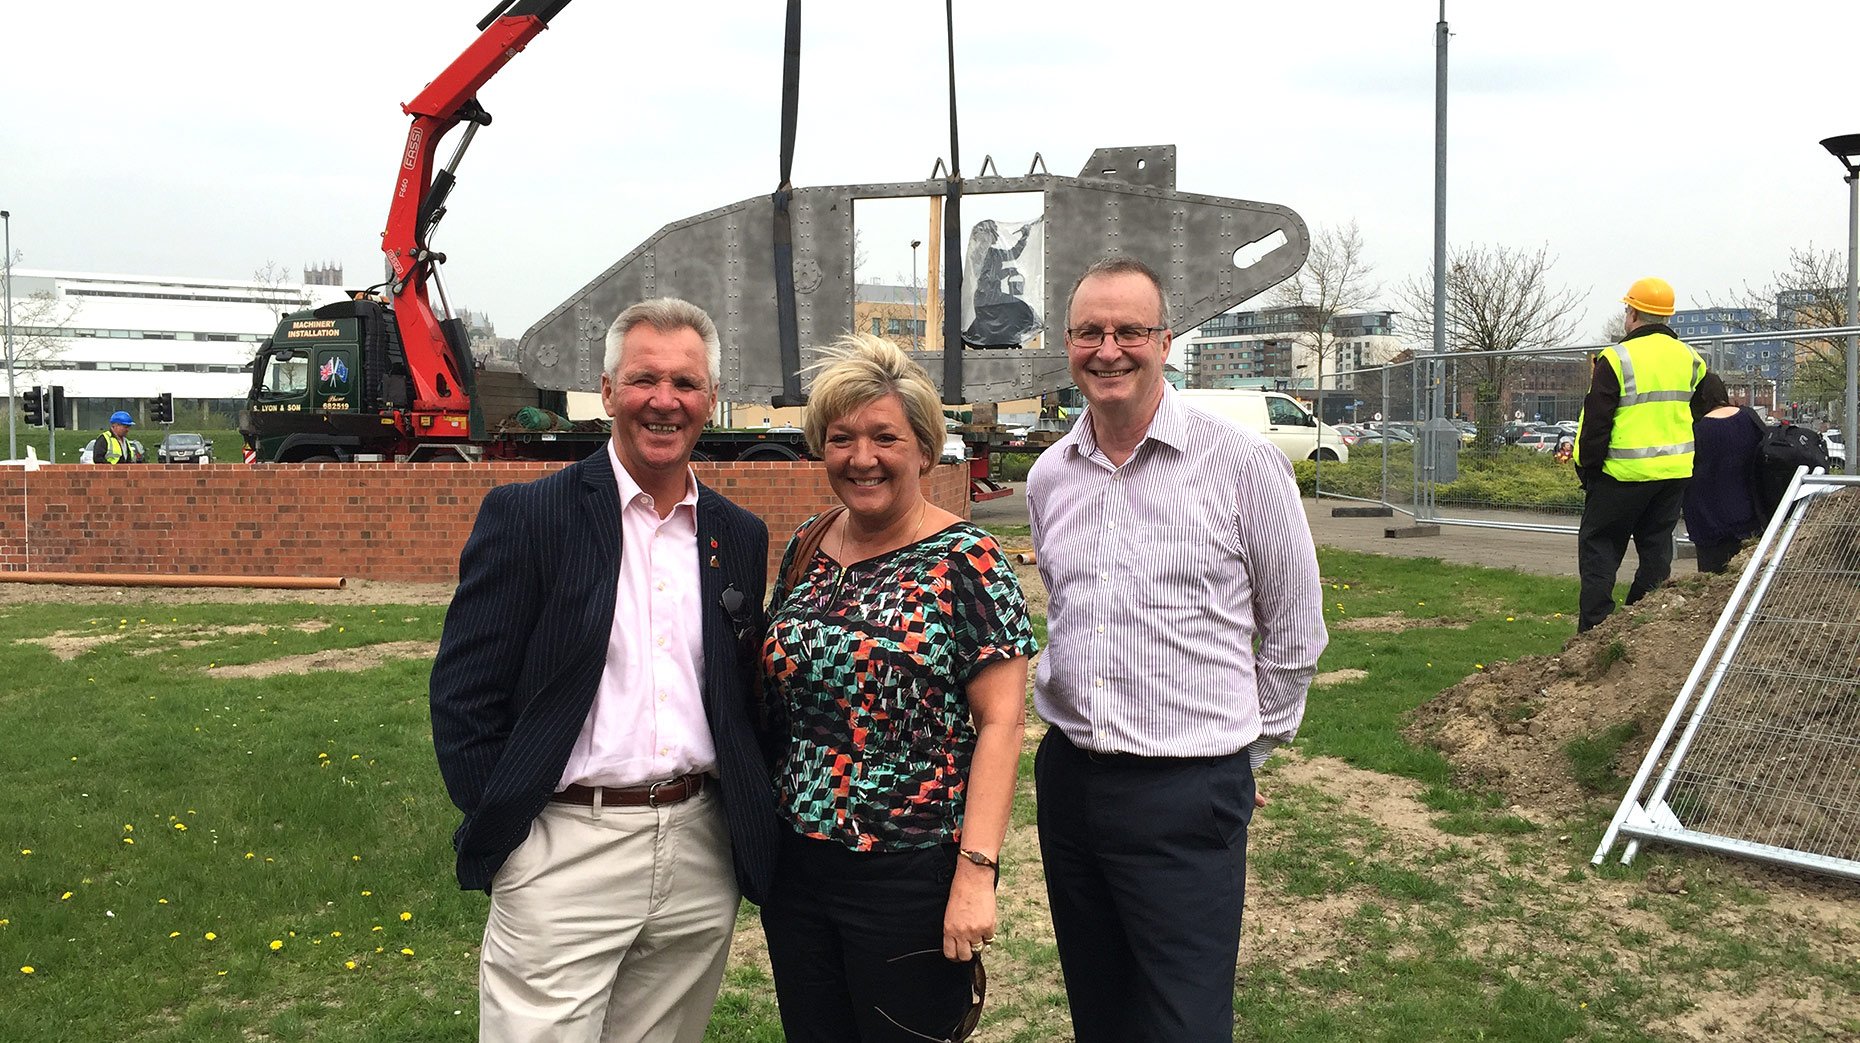 (L-R) Joe and Julie Cooke of the Lincoln Tank Memorial Group, and Allen Wilds, Managing Director of Rilmac.